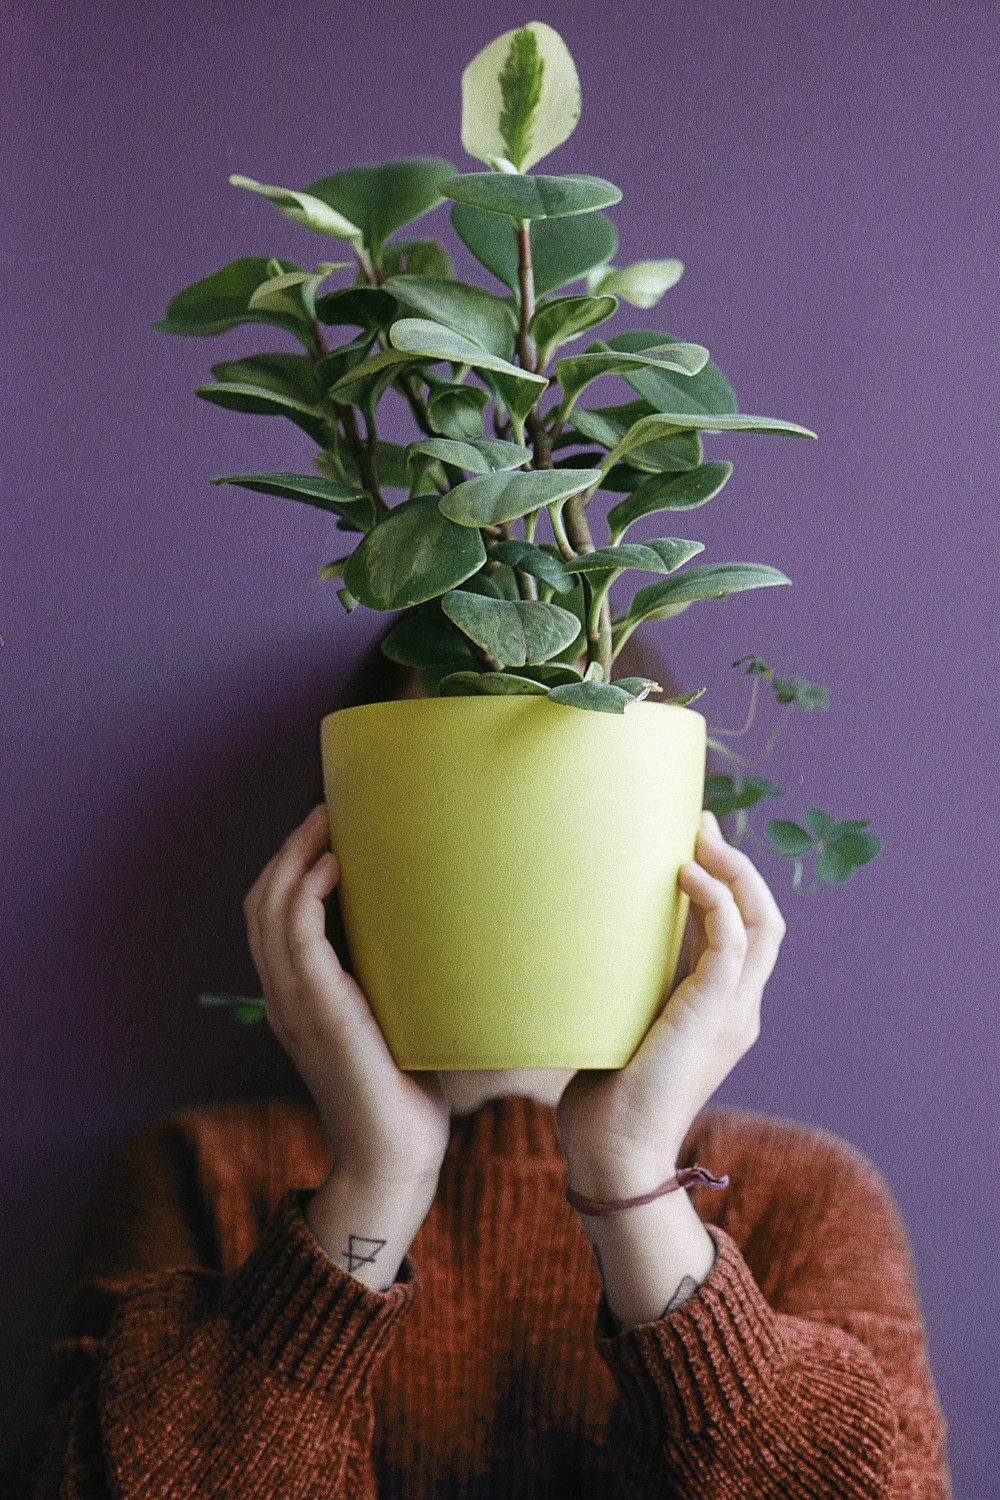 person holding yellow ceramic pot with green plant